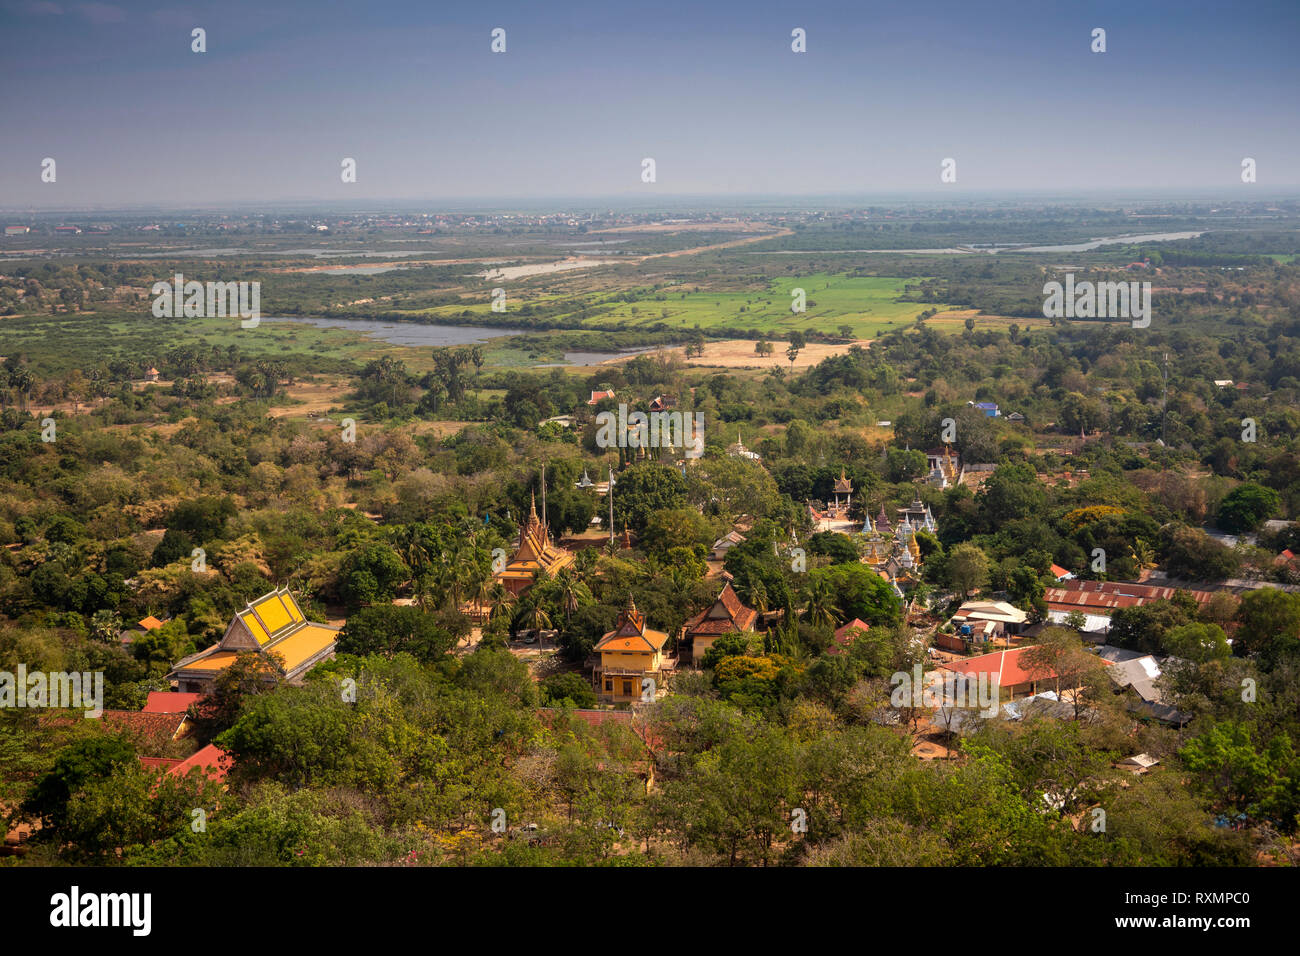 Cambodia, Phnom Penh, Oudong, view east towards monastery and temple from Buddha’s eyebrow hair stupa Stock Photo